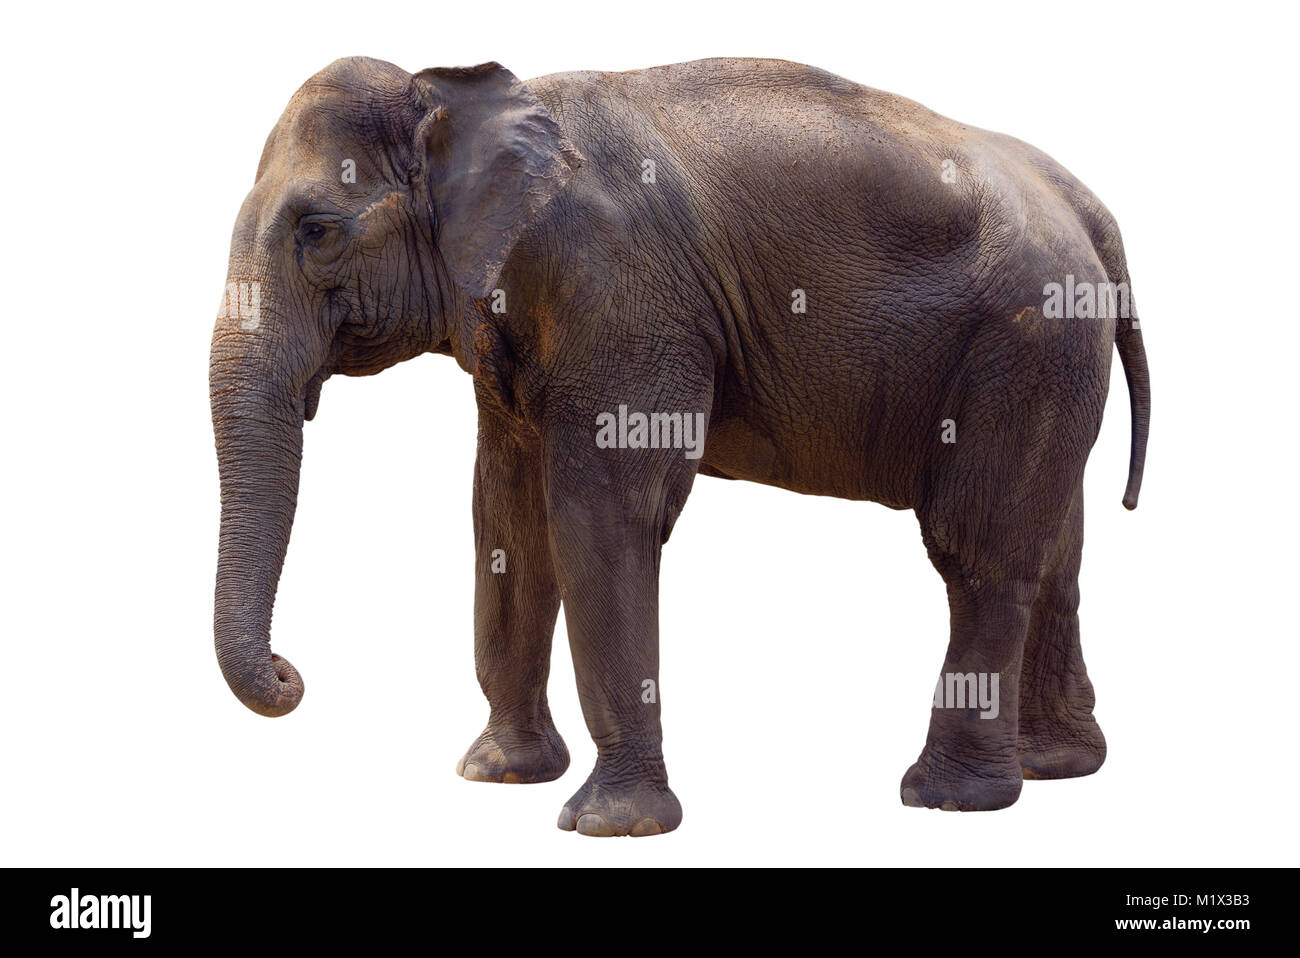 Indian elephant isolated on white Banque D'Images